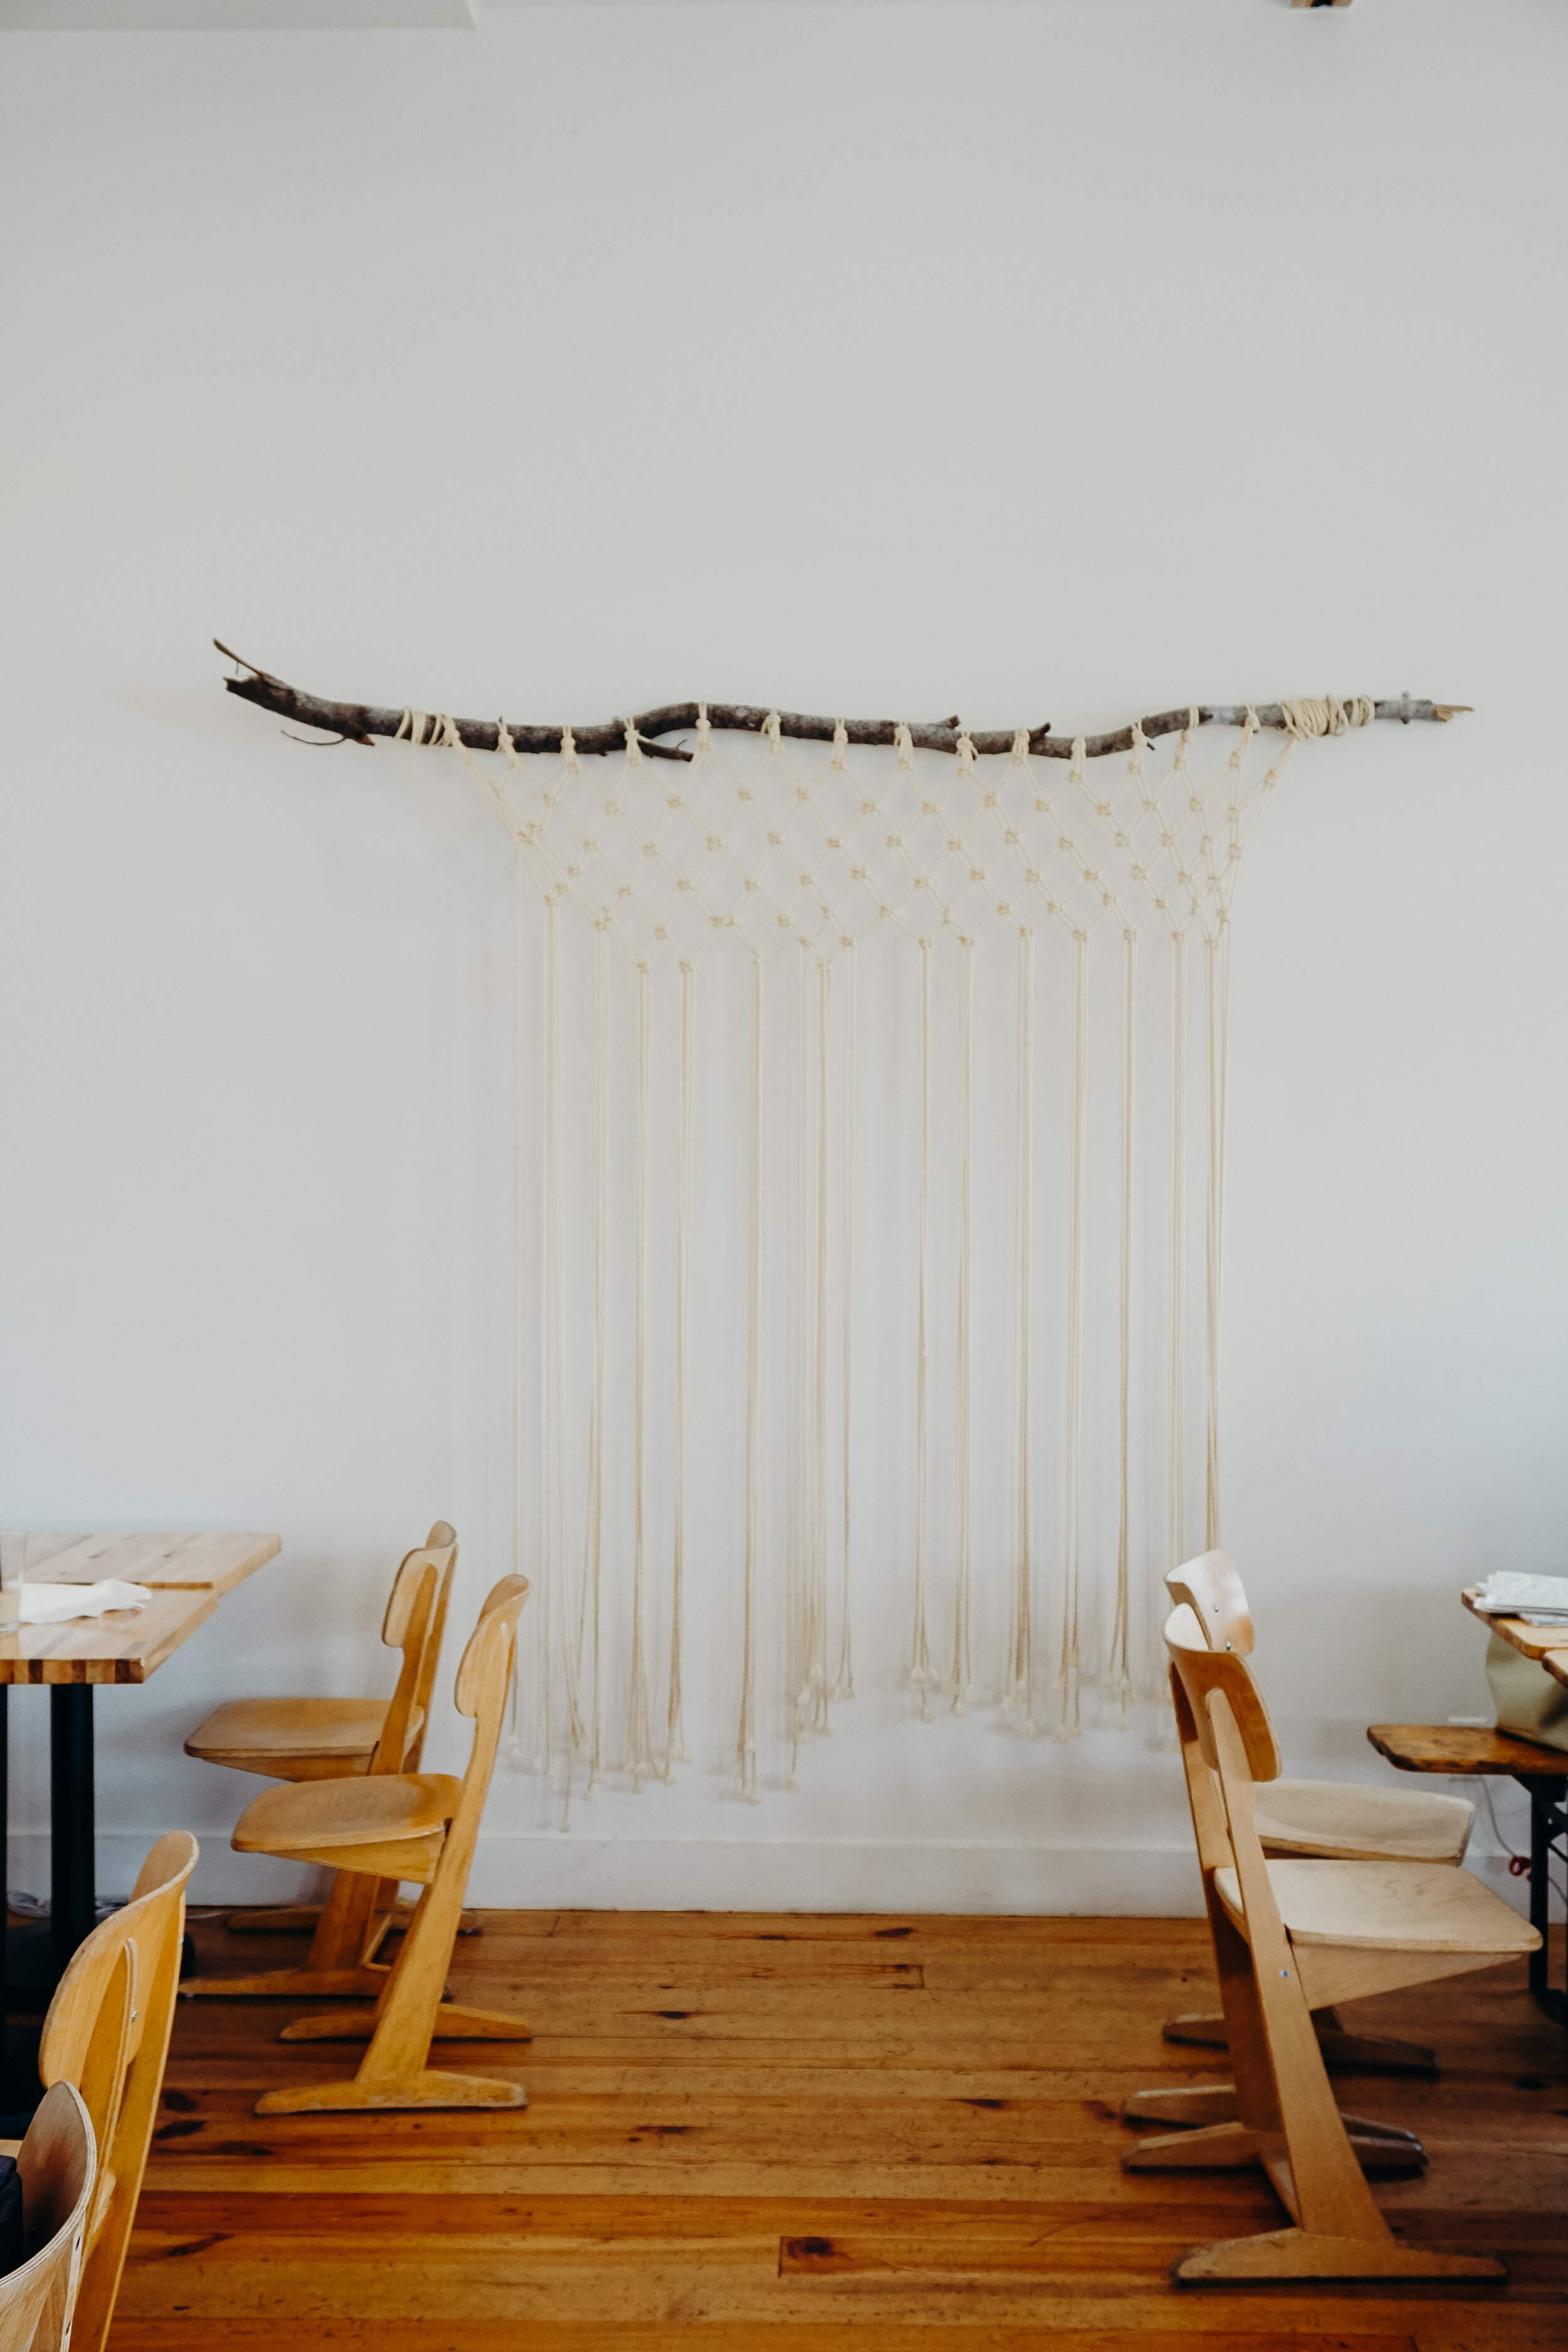 The prettiest coffee shop decorations | Easy macrame hanging